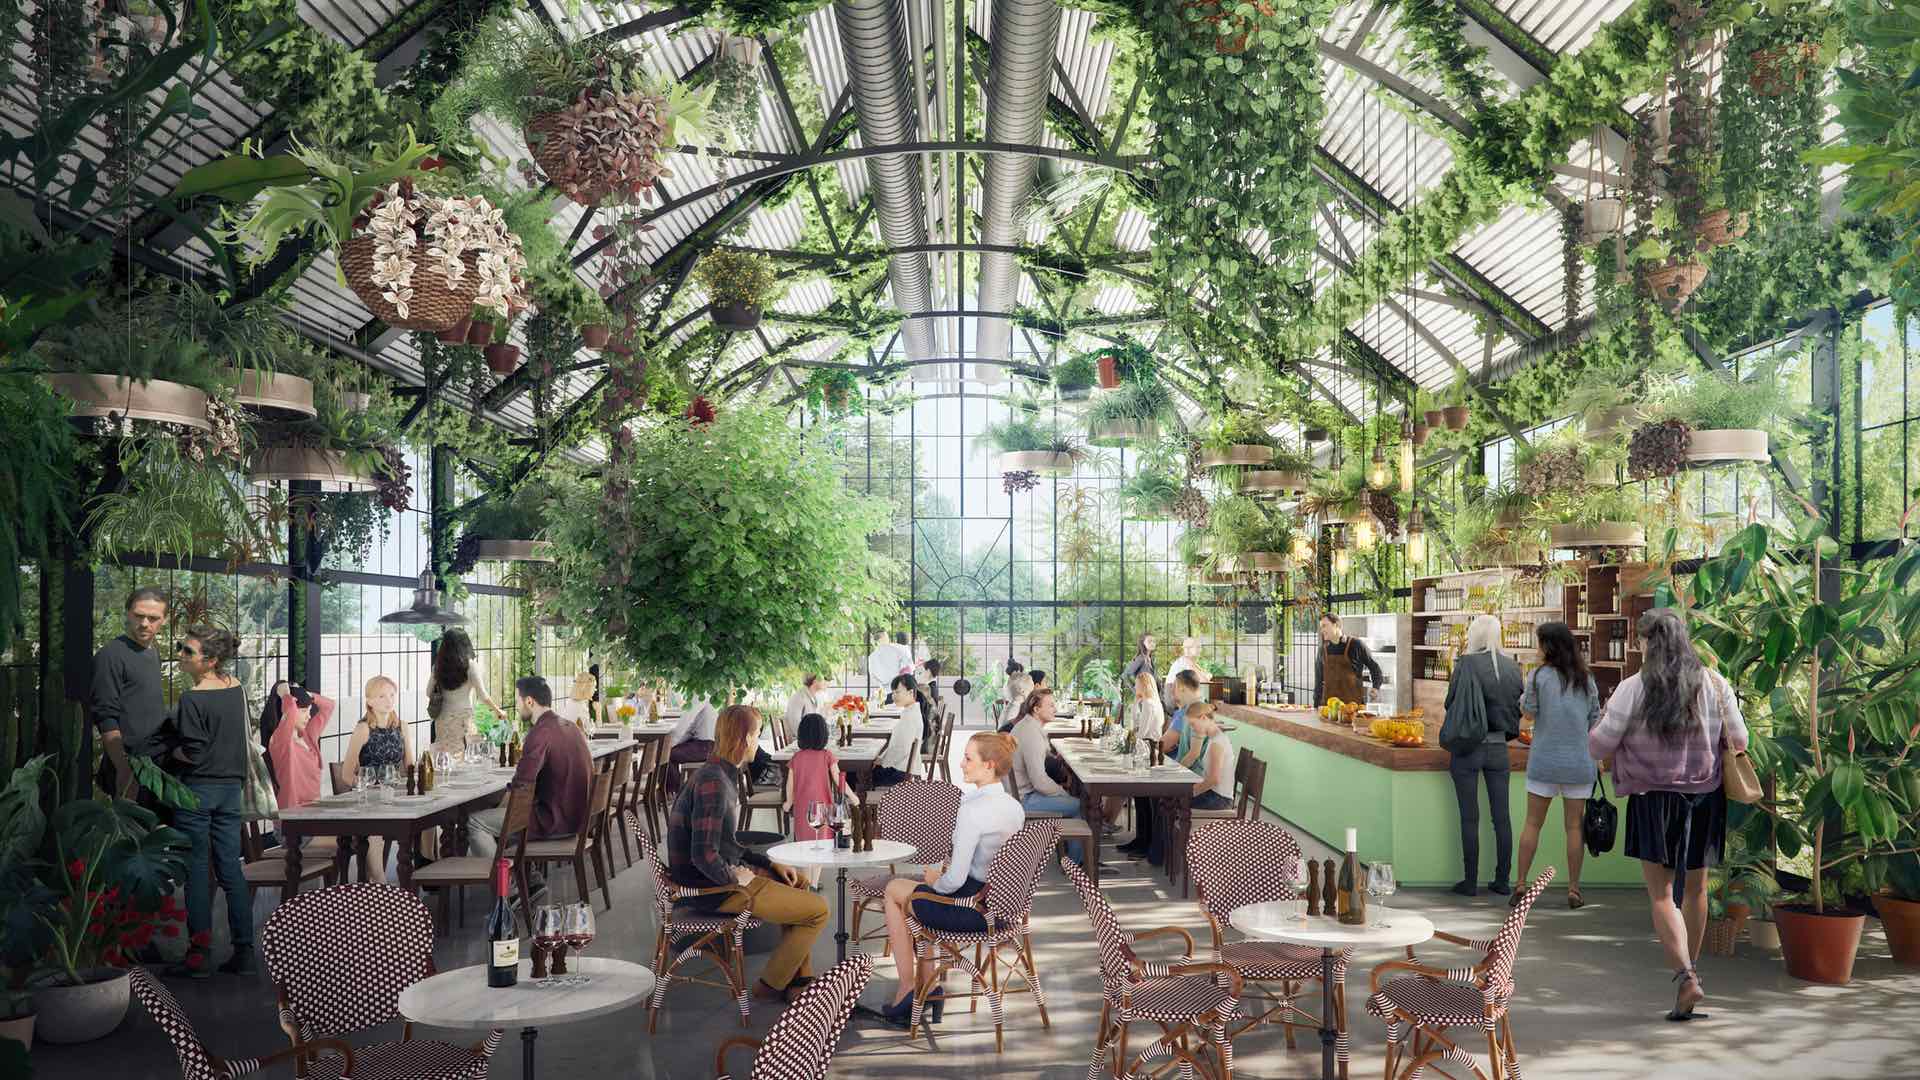 Melbourne Might Soon Be Home to the World's Most Sustainable Shopping Centre